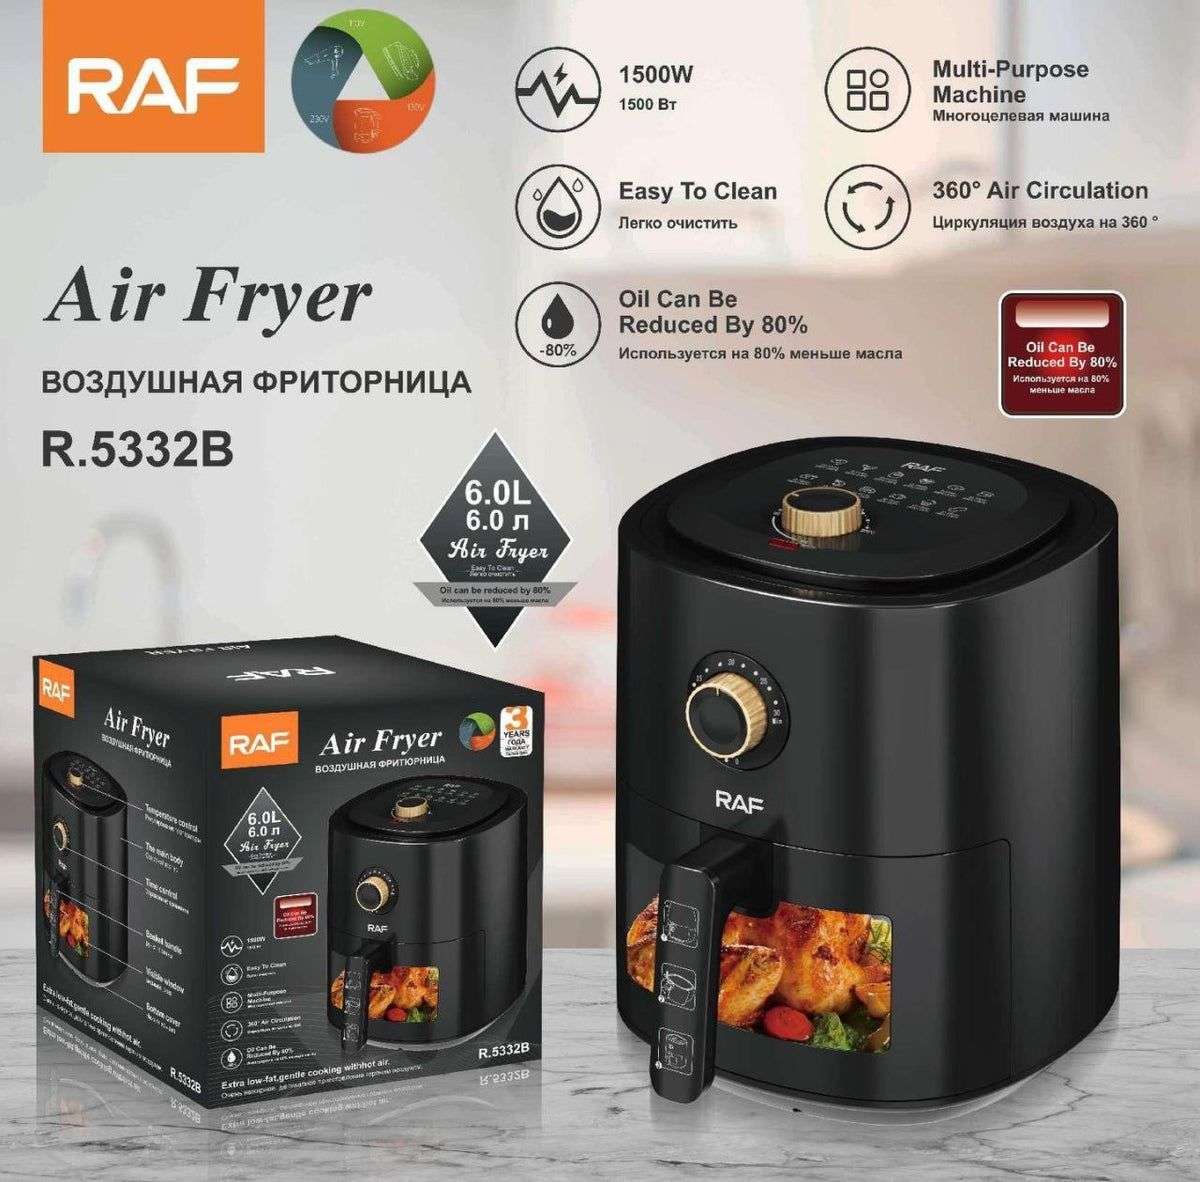 Tiastar Air Fryer, 7.5L Oil Free Air Fryers Home Use 1700W with